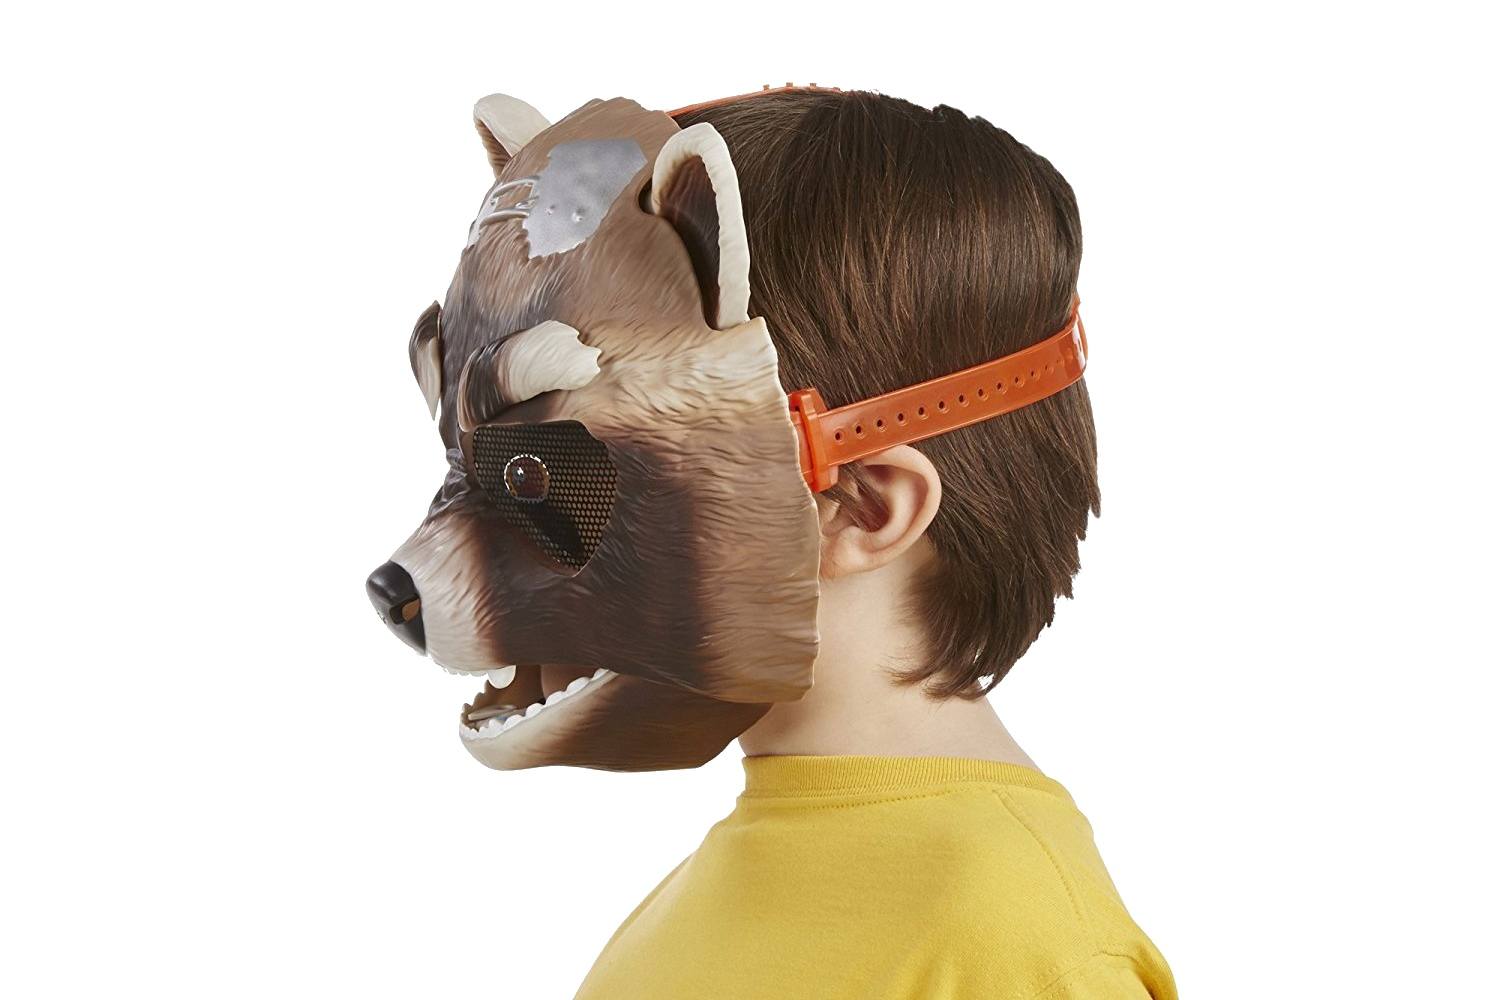 Marvel Guardians of the Galaxy Rocket Raccoon Action Mask - image 4 of 5